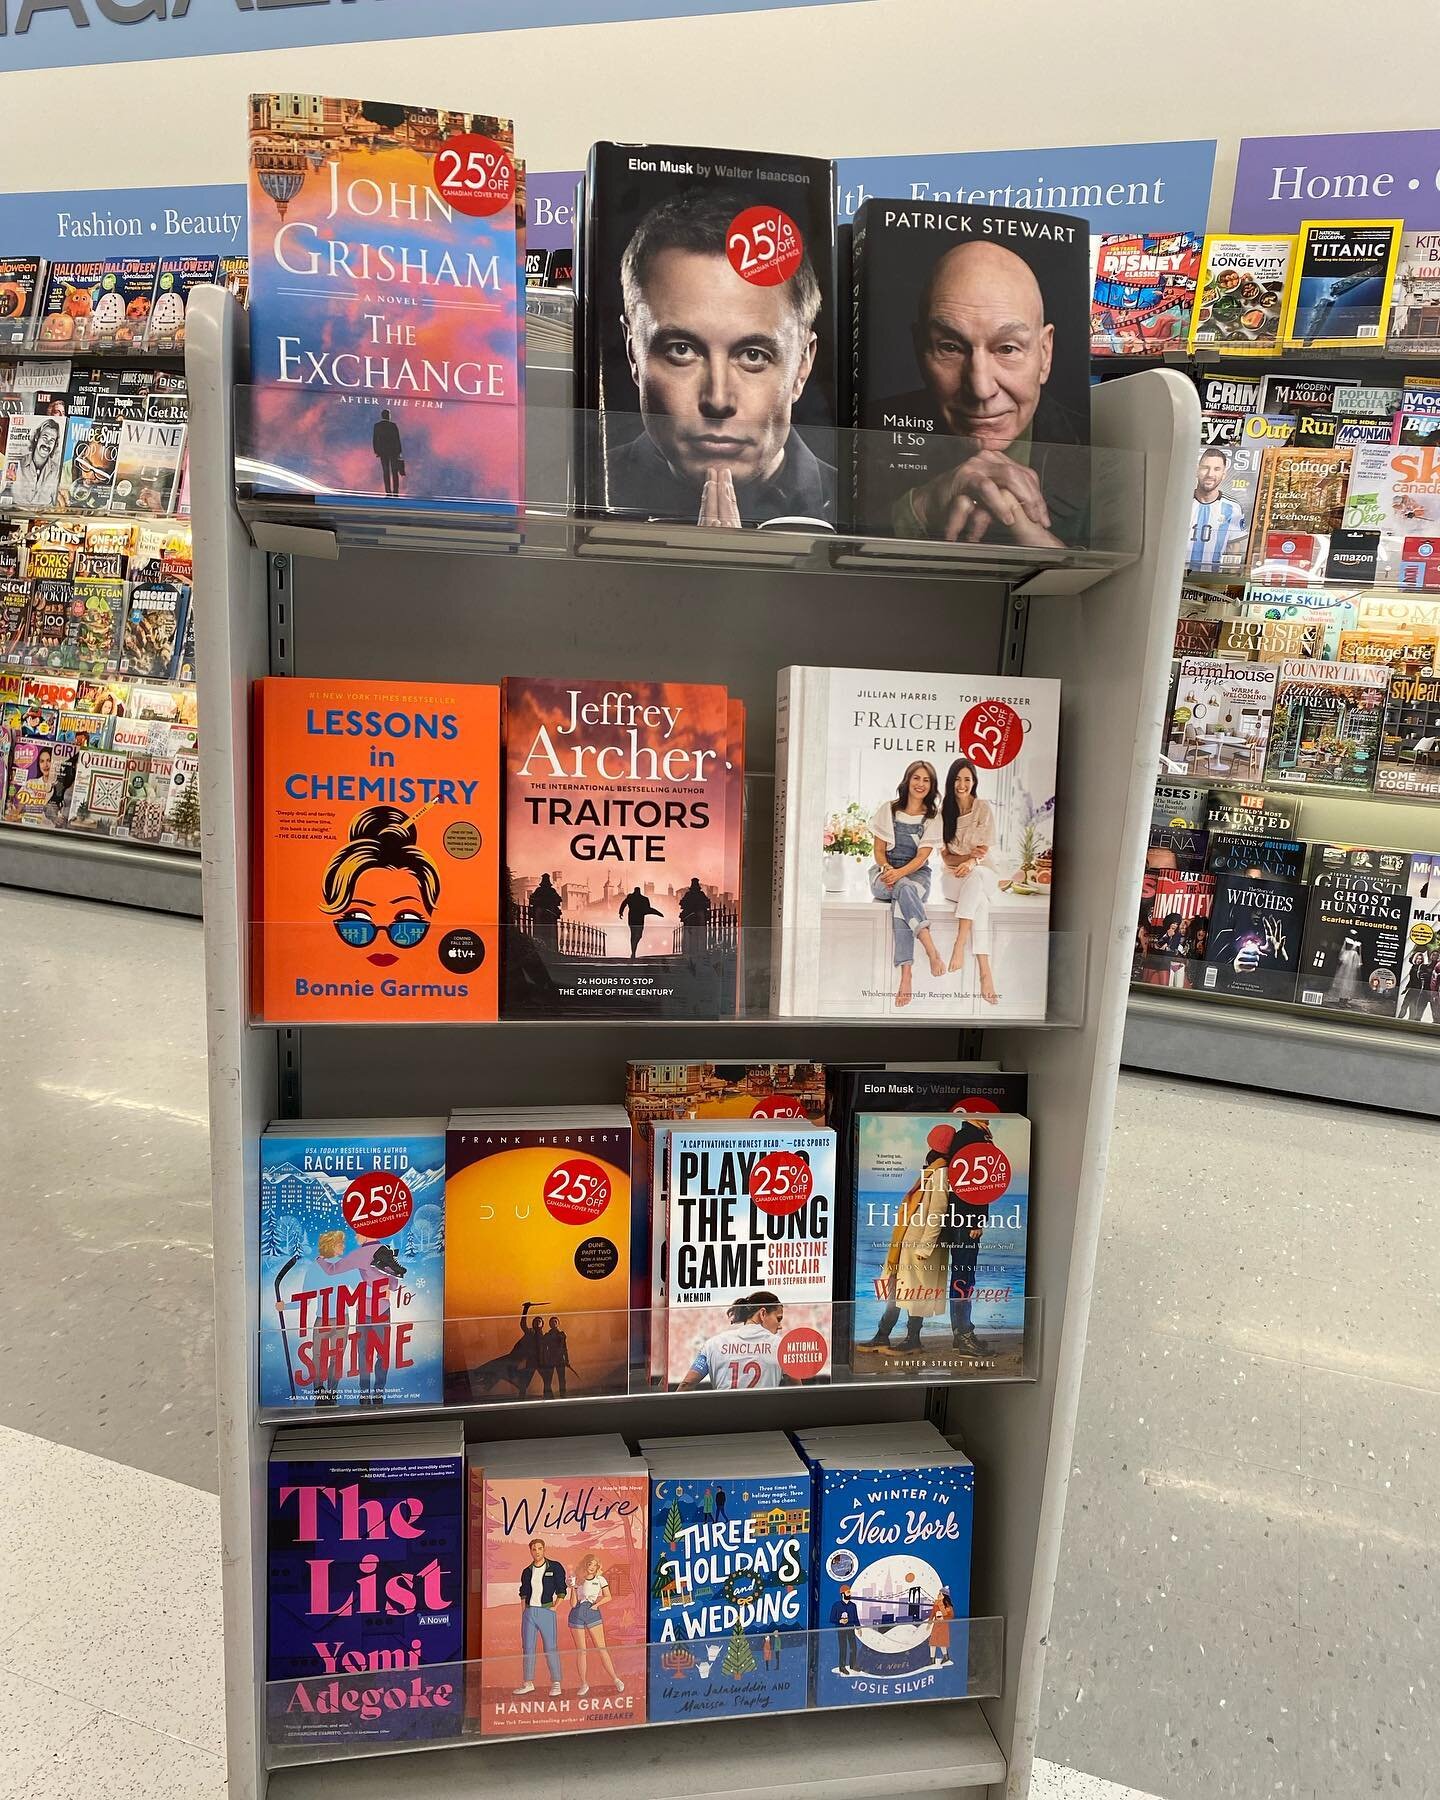 When I heard TIME TO SHINE was being stocked by Shoppers in Canada I had to check it out for myself. People love to dismiss &ldquo;drug store books&rdquo; but if your book is actually stocked by drug stores that&rsquo;s a HUGE DEAL! I never expected 